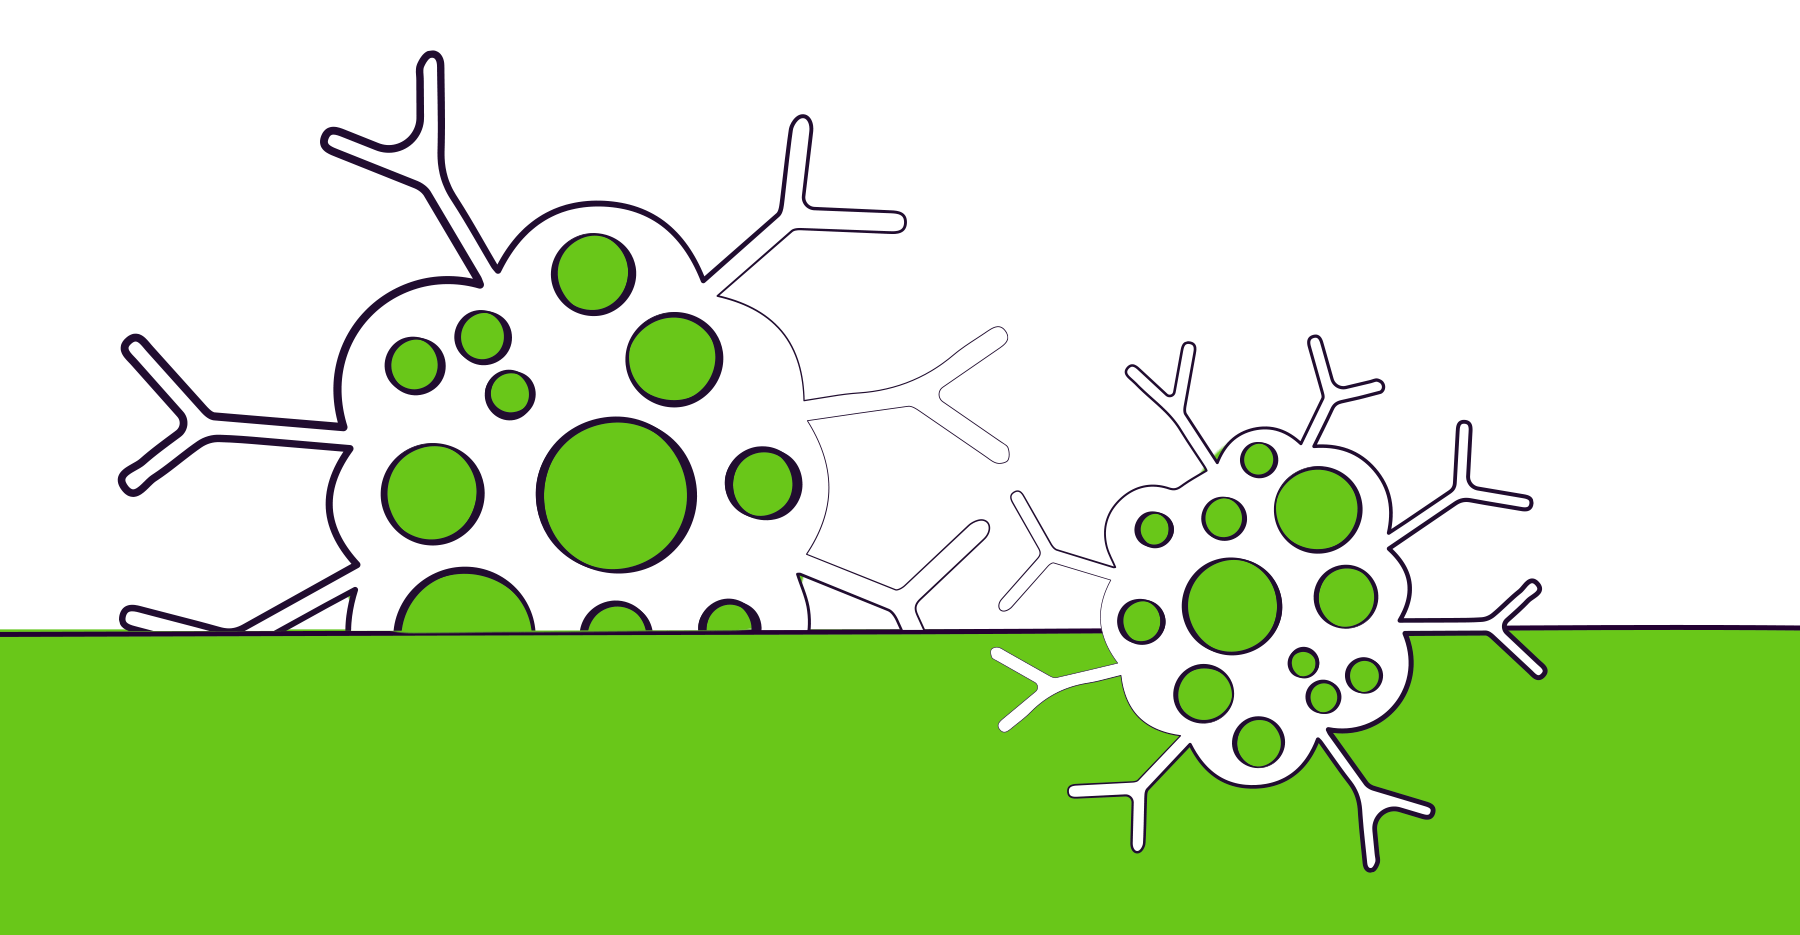 An illustration of some cells over a green background